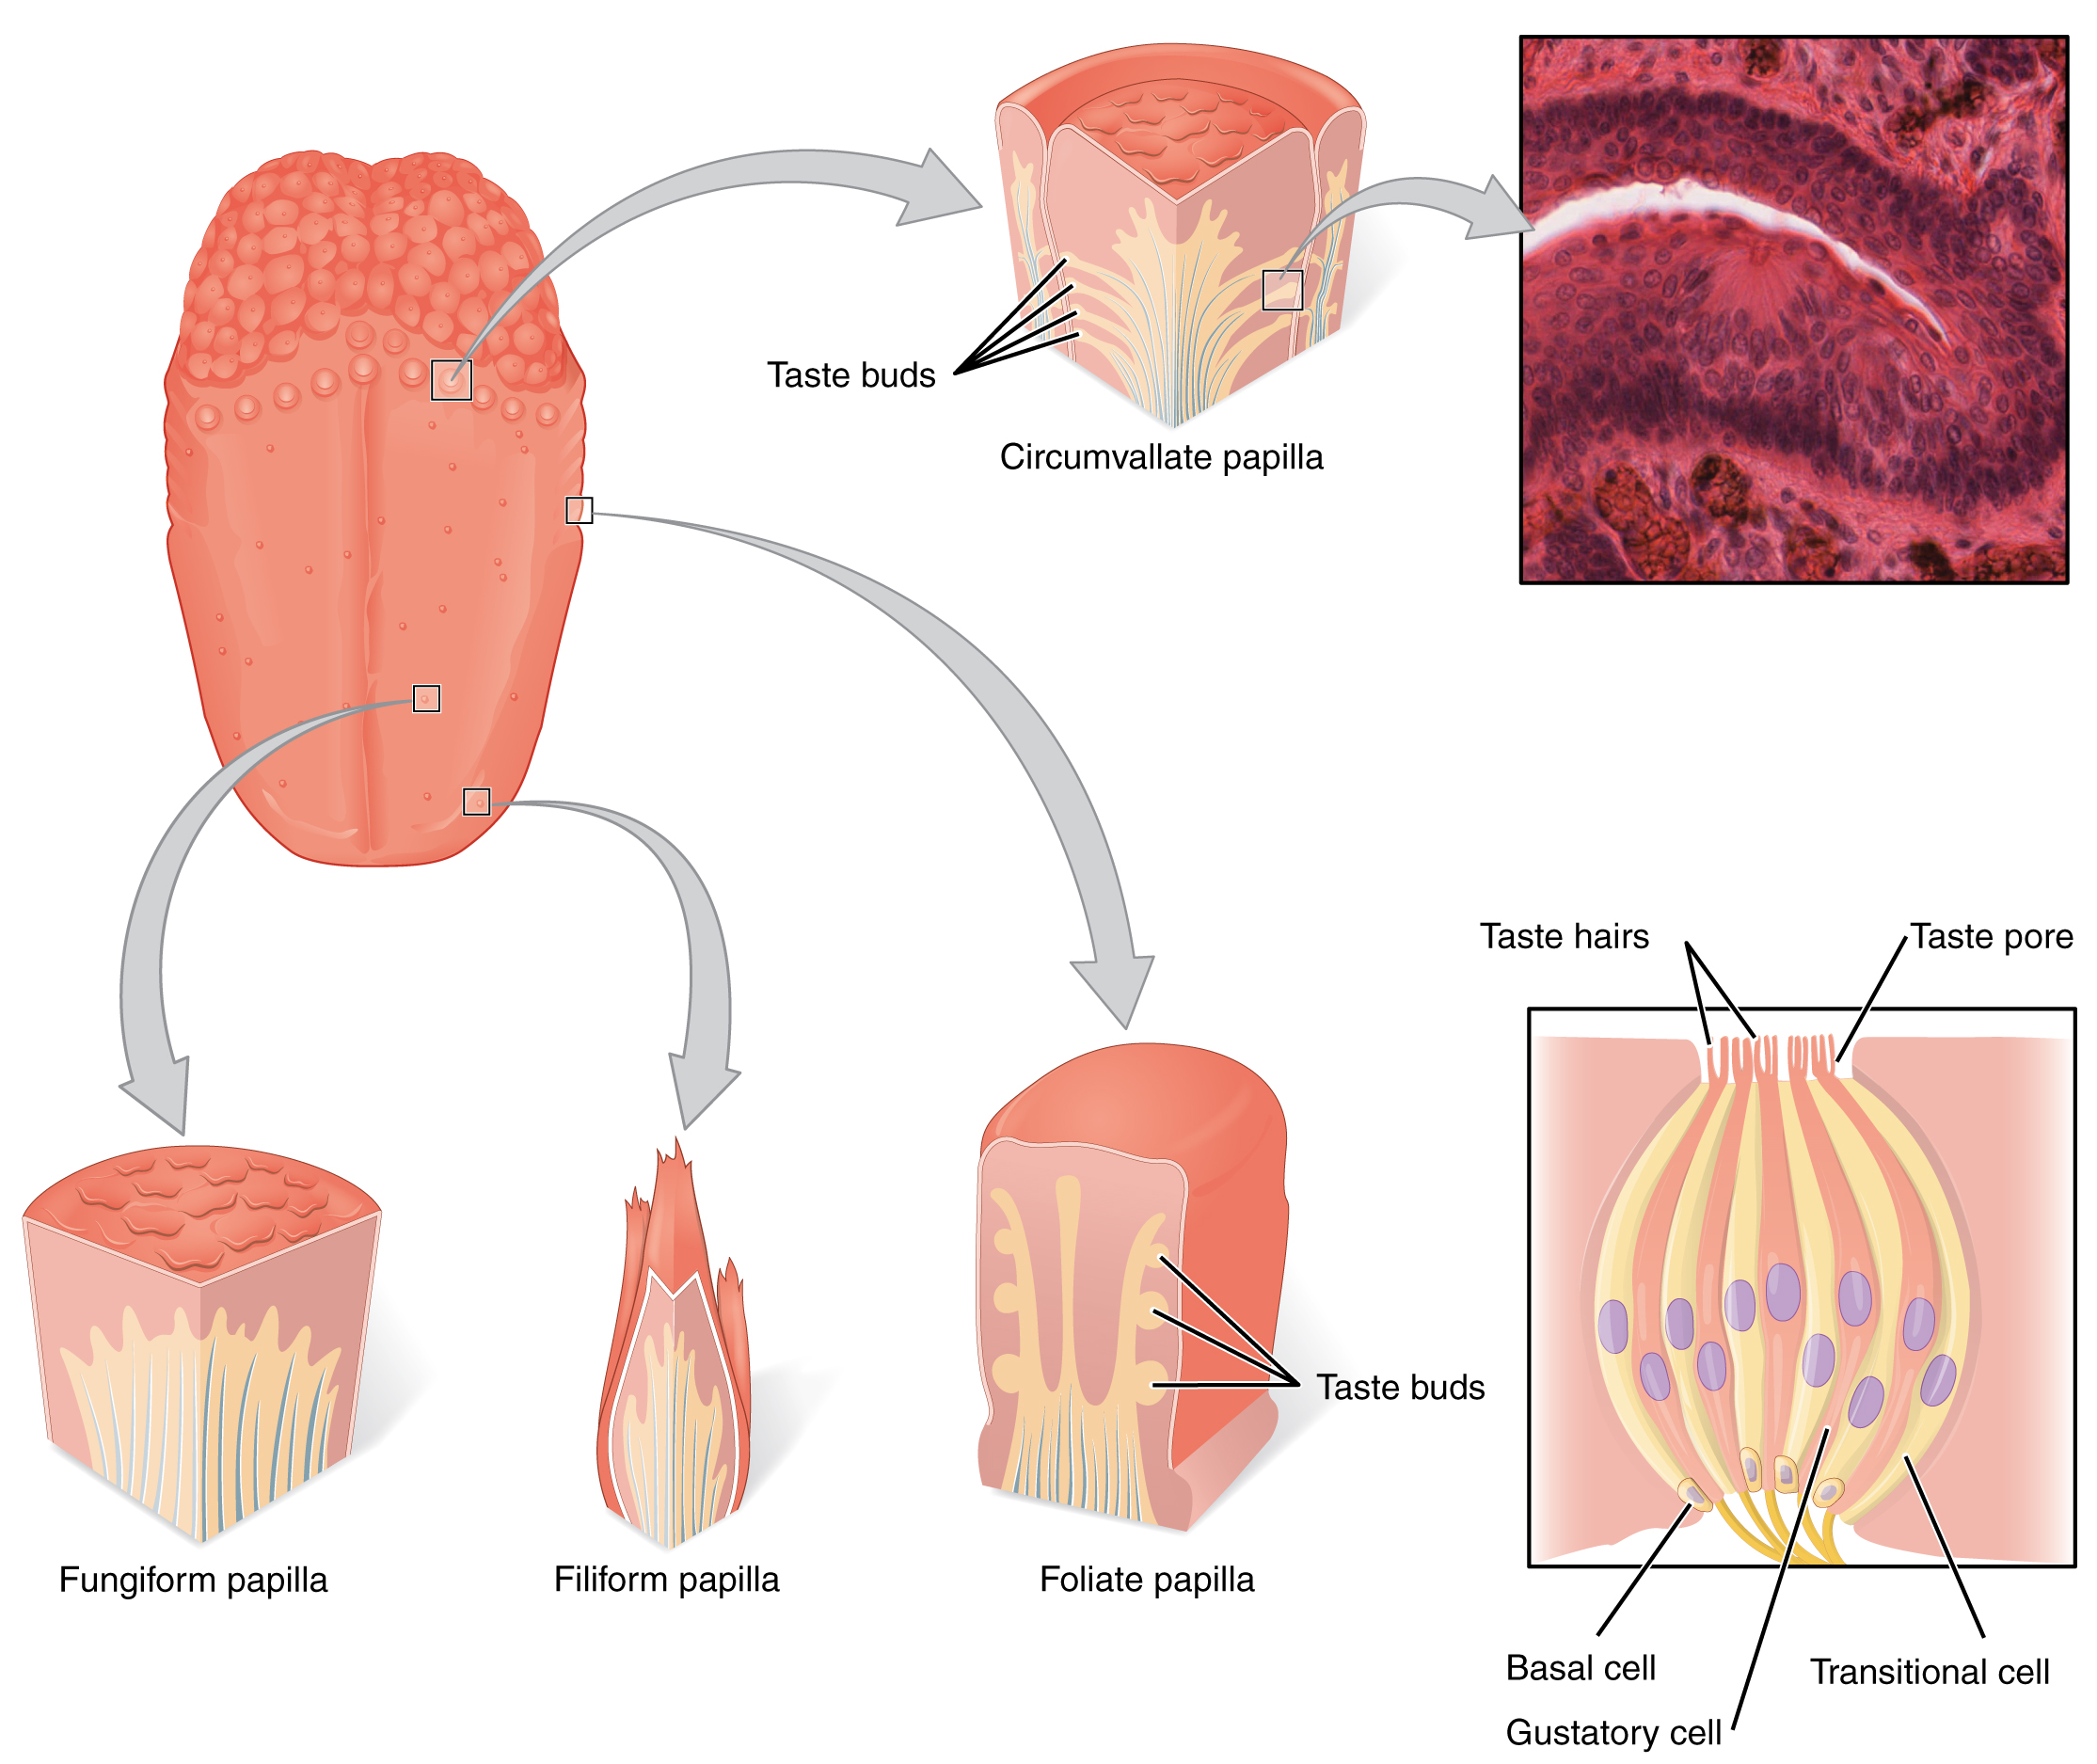 The left panel shows the image of a tongue with callouts that show magnified views of different parts of the tongue. The top right panel shows a micrograph of the circumvallate papilla, and the bottom right panel shows the structure of a taste bud.